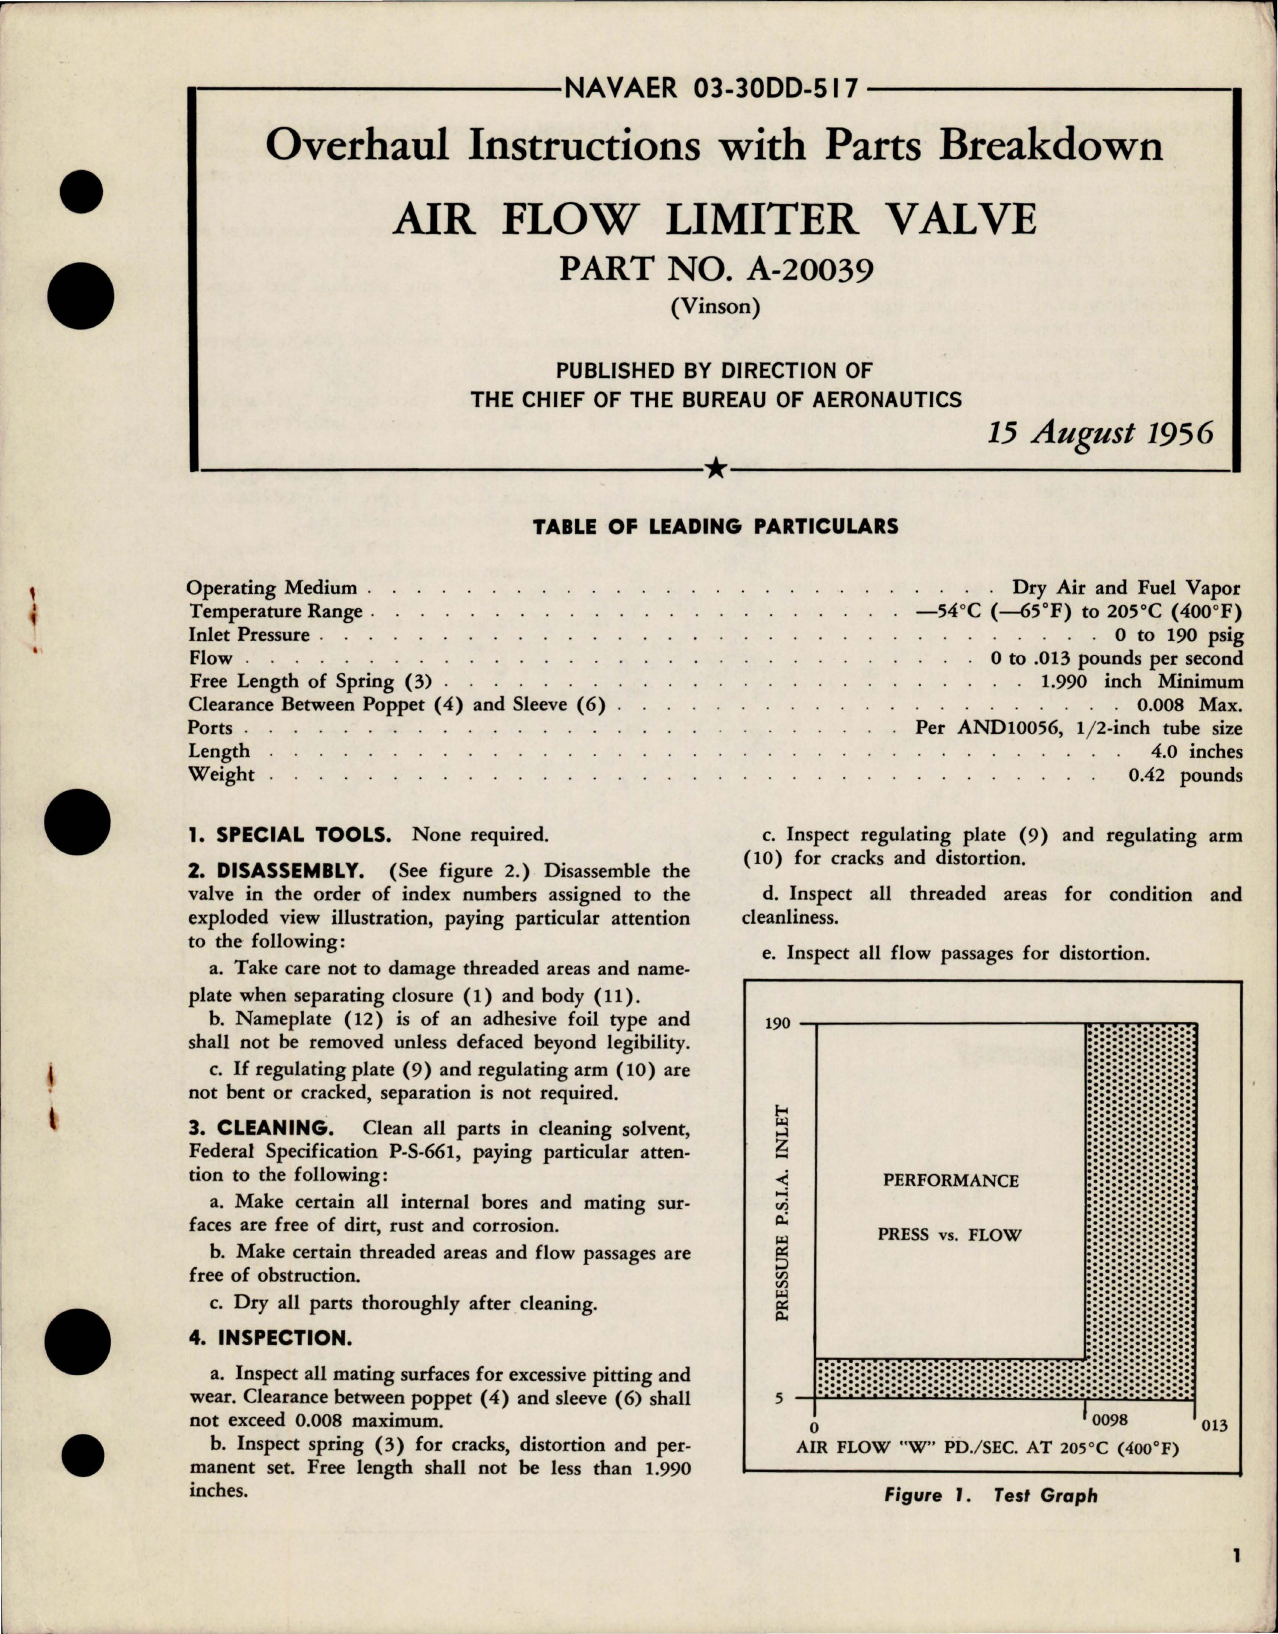 Sample page 1 from AirCorps Library document: Overhaul Instructions with Parts Breakdown for Air Flow Limiter Valve - Part A-20039 